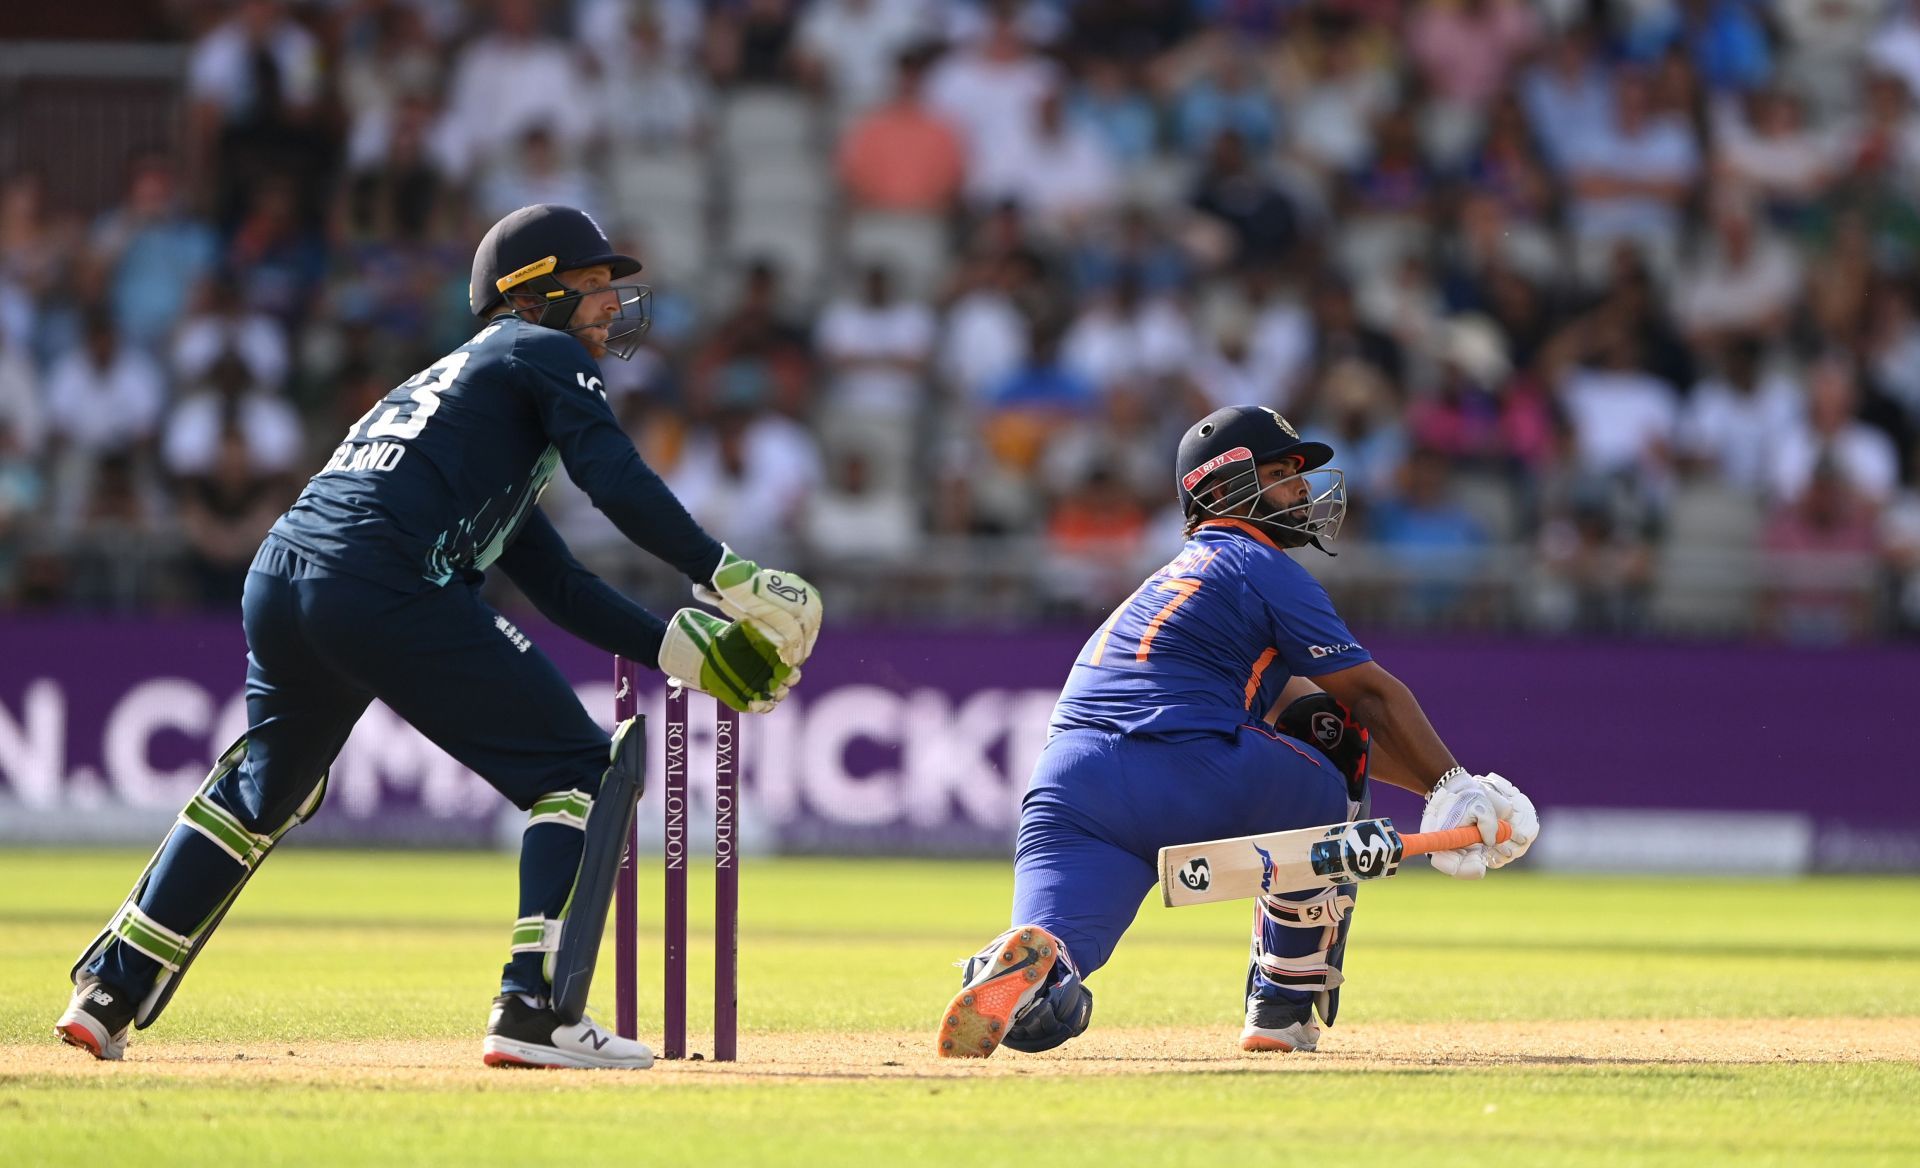 Rishabh Pant anchored the chase in the series decider